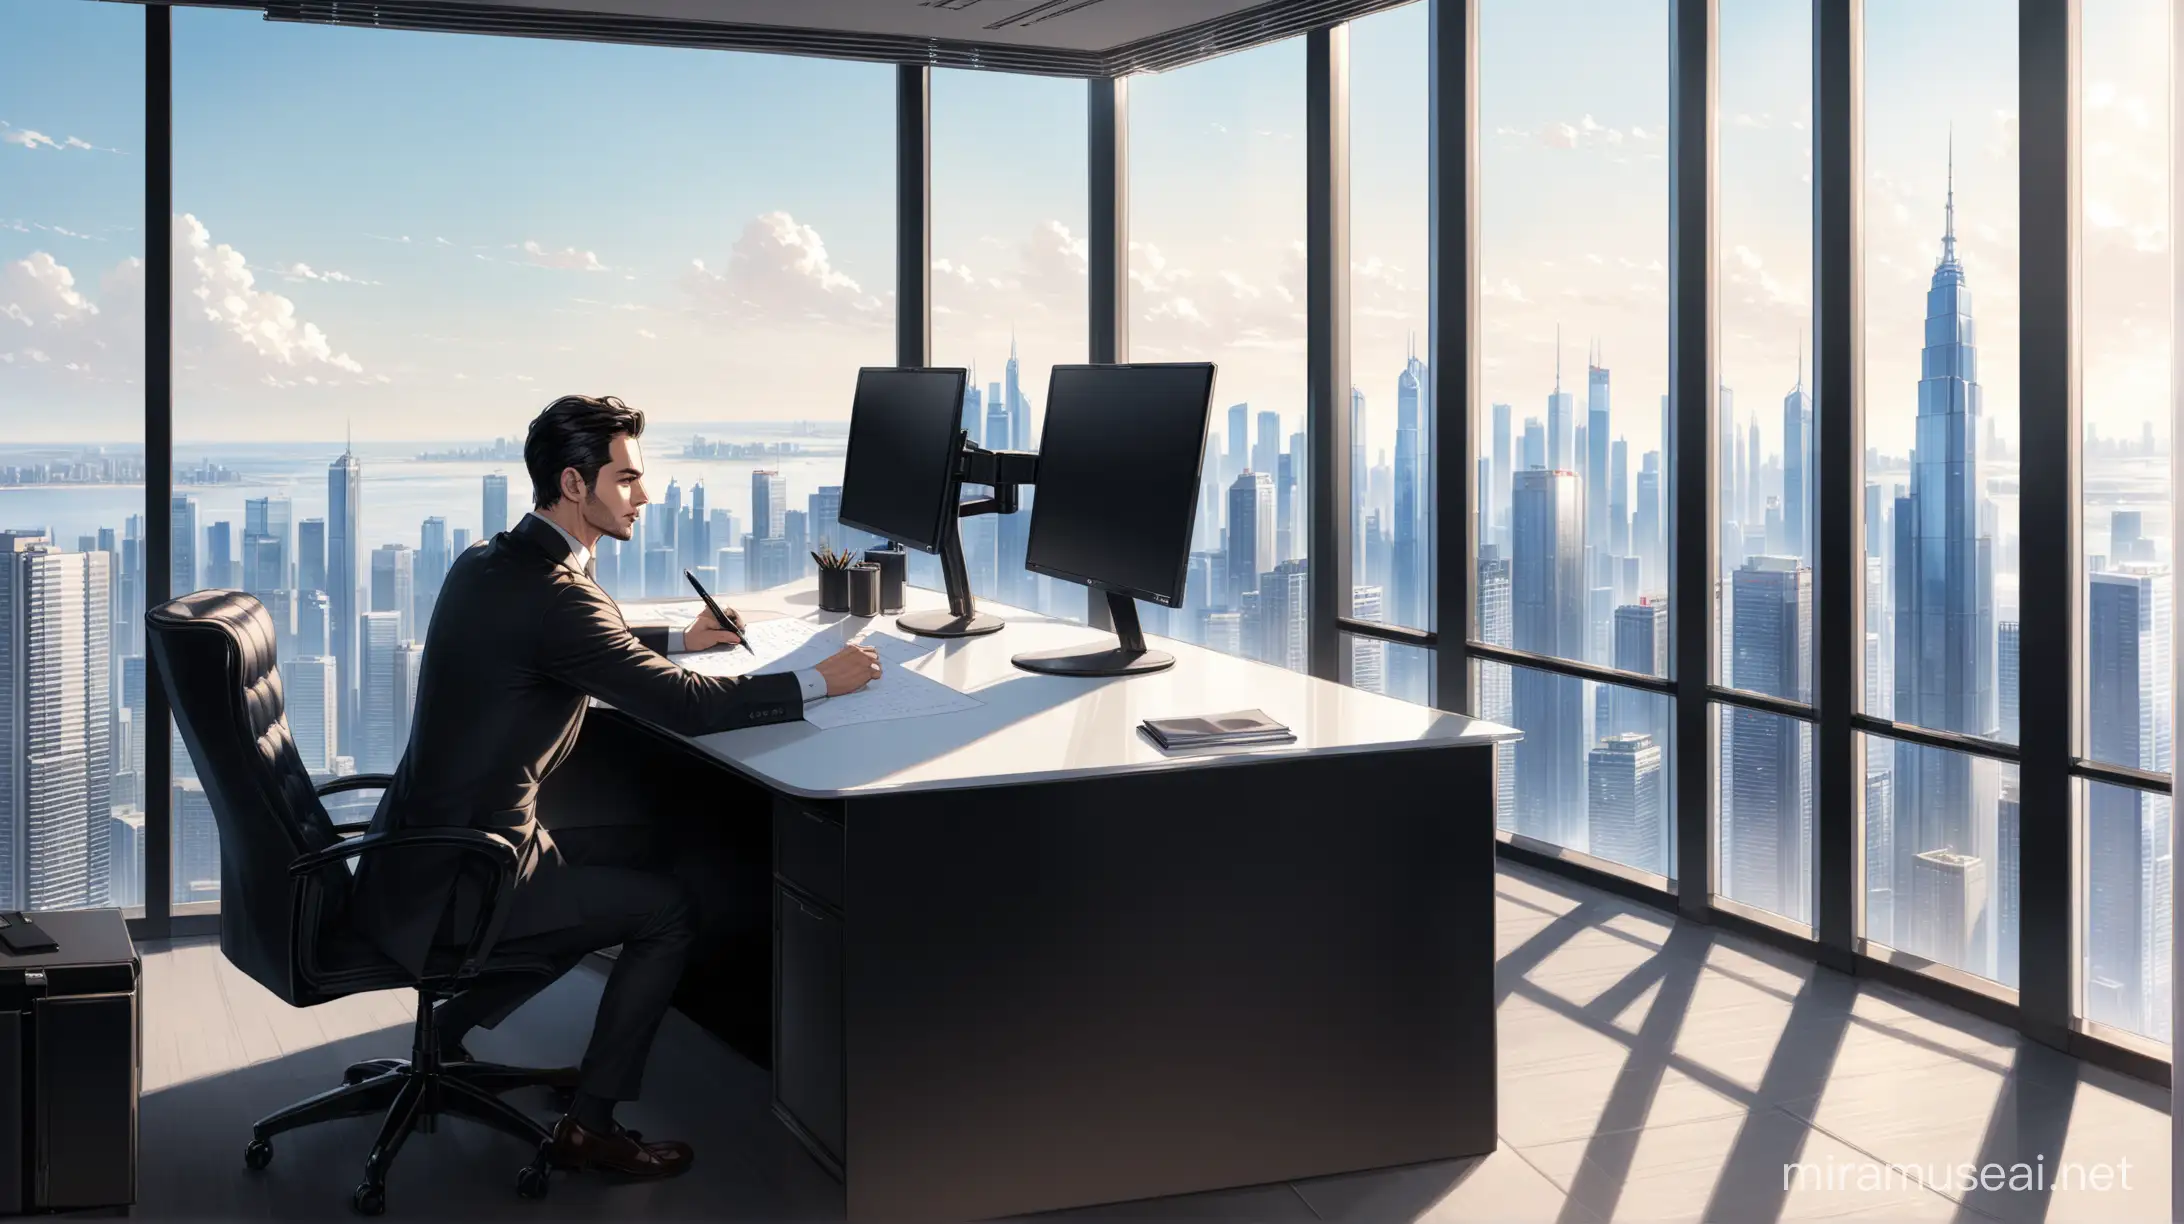 A man ina well tailored black coat writing a draft on his large monitor sitting in a posh corner office overlooking the skyscrapers during the daytime